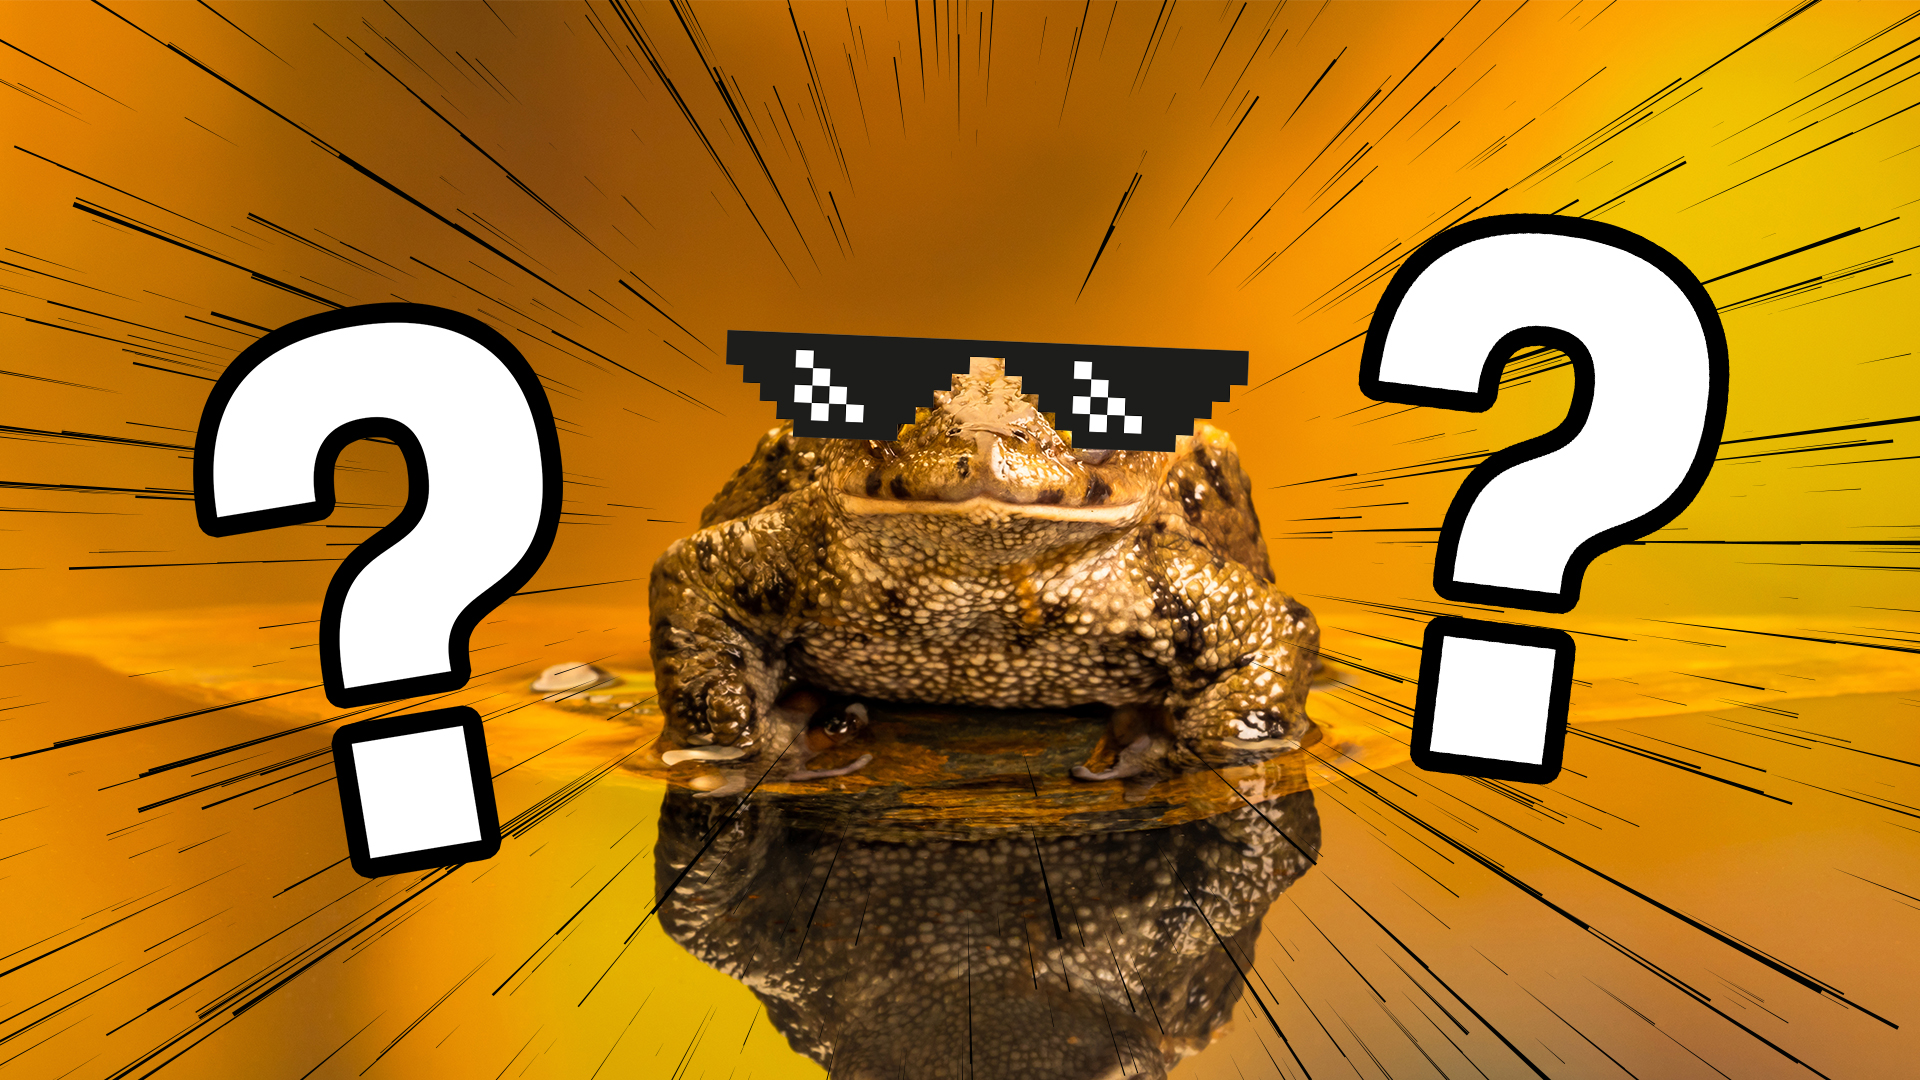 A cool toad is wearing sunglasses